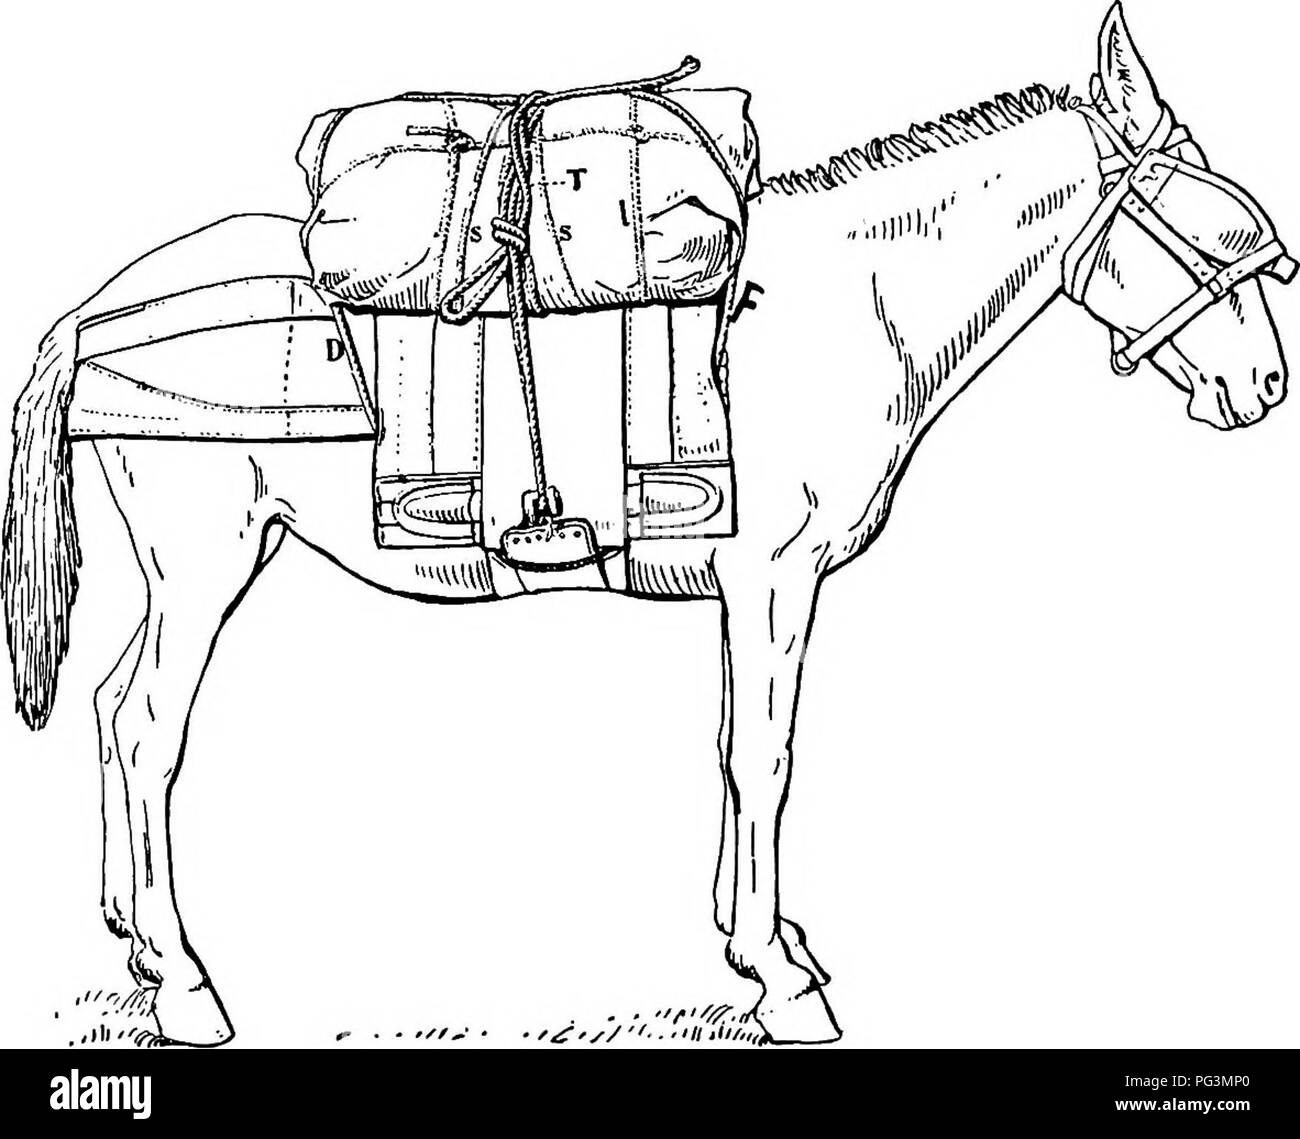 . Manual of pack transportation: Quartermaster Corps. Transportation, Military; Mules; Pack transportation. MANUAL OF PACK TEANSPOETATION. 89 the load; hence the name given this form of hitch. In its formation a single knot is made, and when undoing the hitch the end, or top rope, when freed, is pidled or drawn from between the standing and running ropes; this leaves the lash rope free of knot. In the formation of the &quot;diamond&quot; the rope has six designated names: On the &quot;near&quot; side we have the standing, running, and marking ropes, and the front, rear, and top ropes. On the & Stock Photo